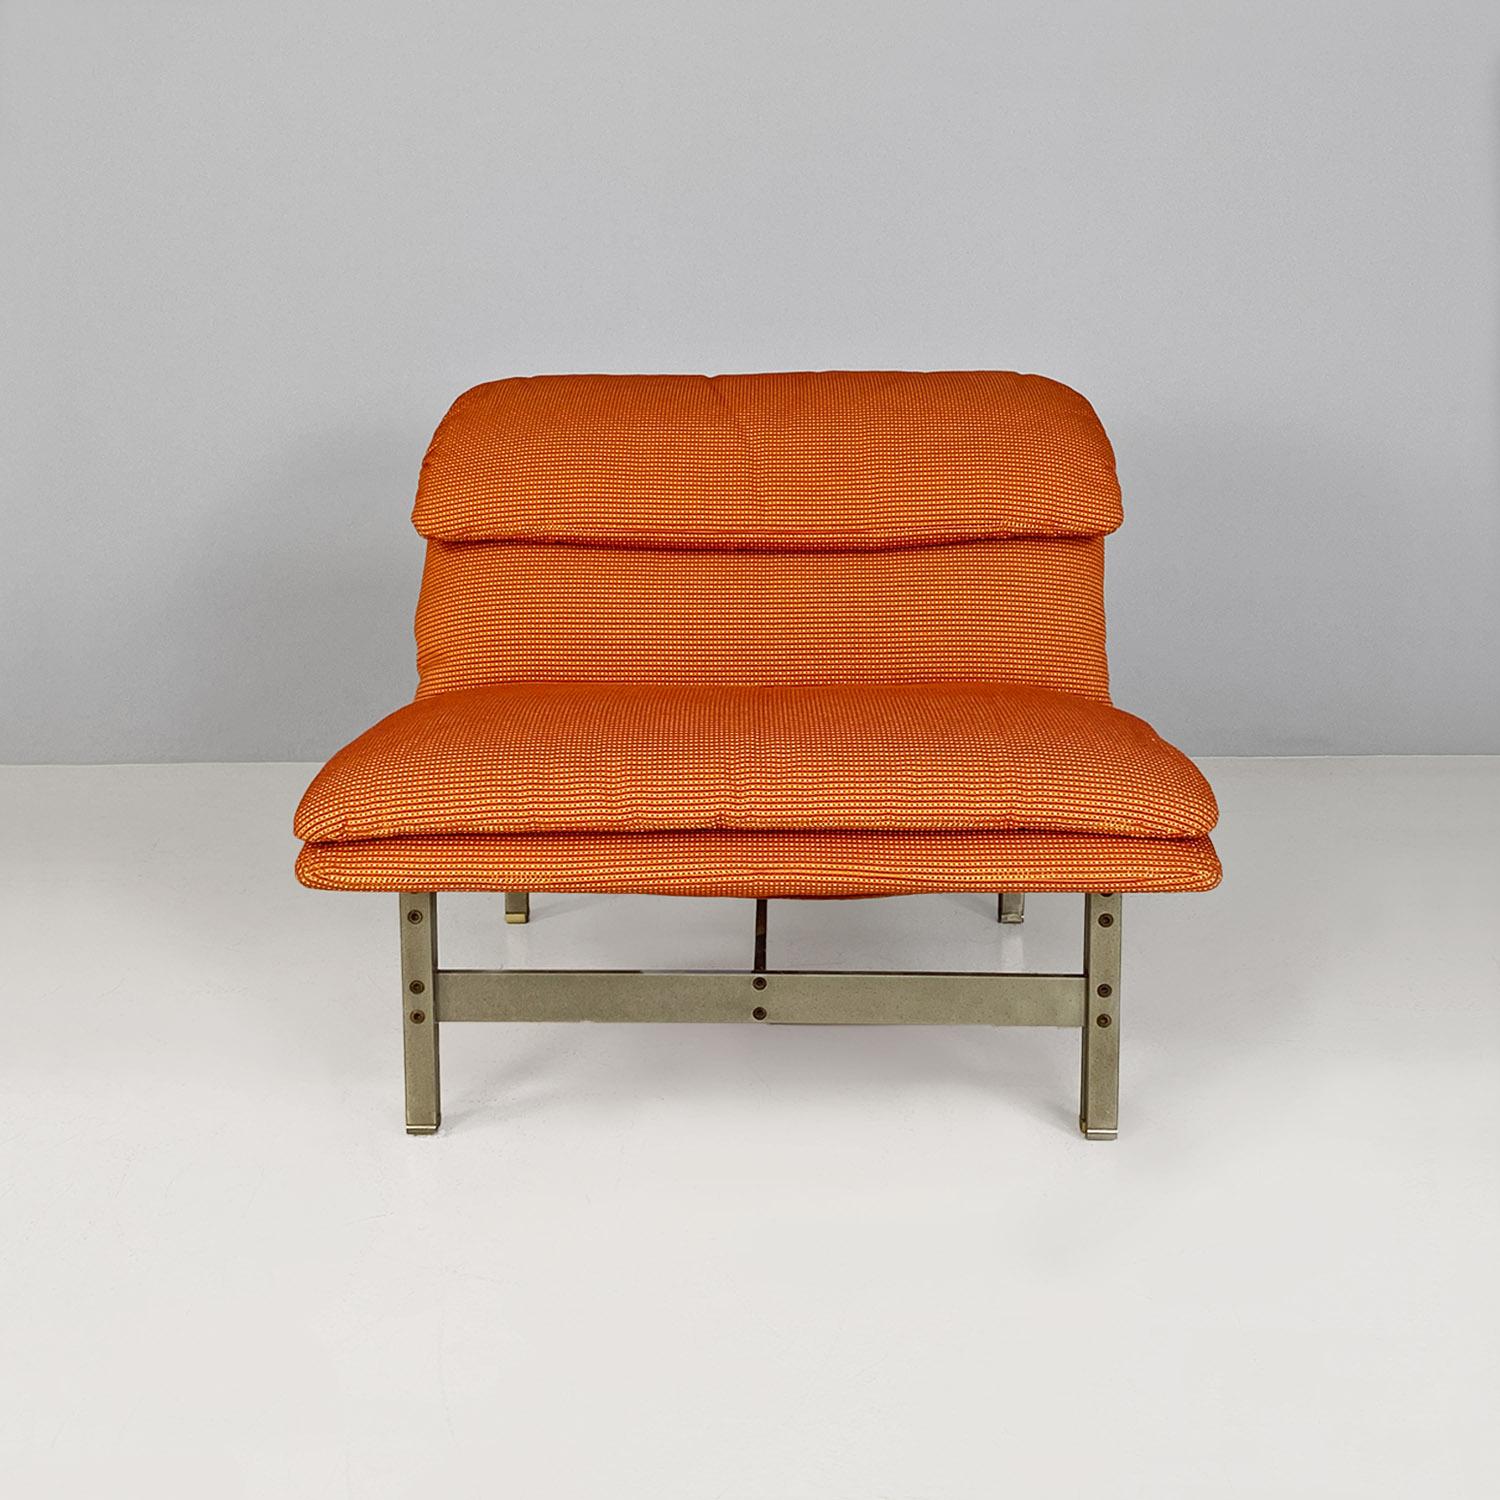 Italian modern steel and fabric Wave armchair by Giovanni Offredi for Saporiti Italia, 1974.
Wave model armchair, with original orange fabric and satin steel structure and legs.
Produced by Saporiti Italia, based on a design by Giovanni Offredi, in